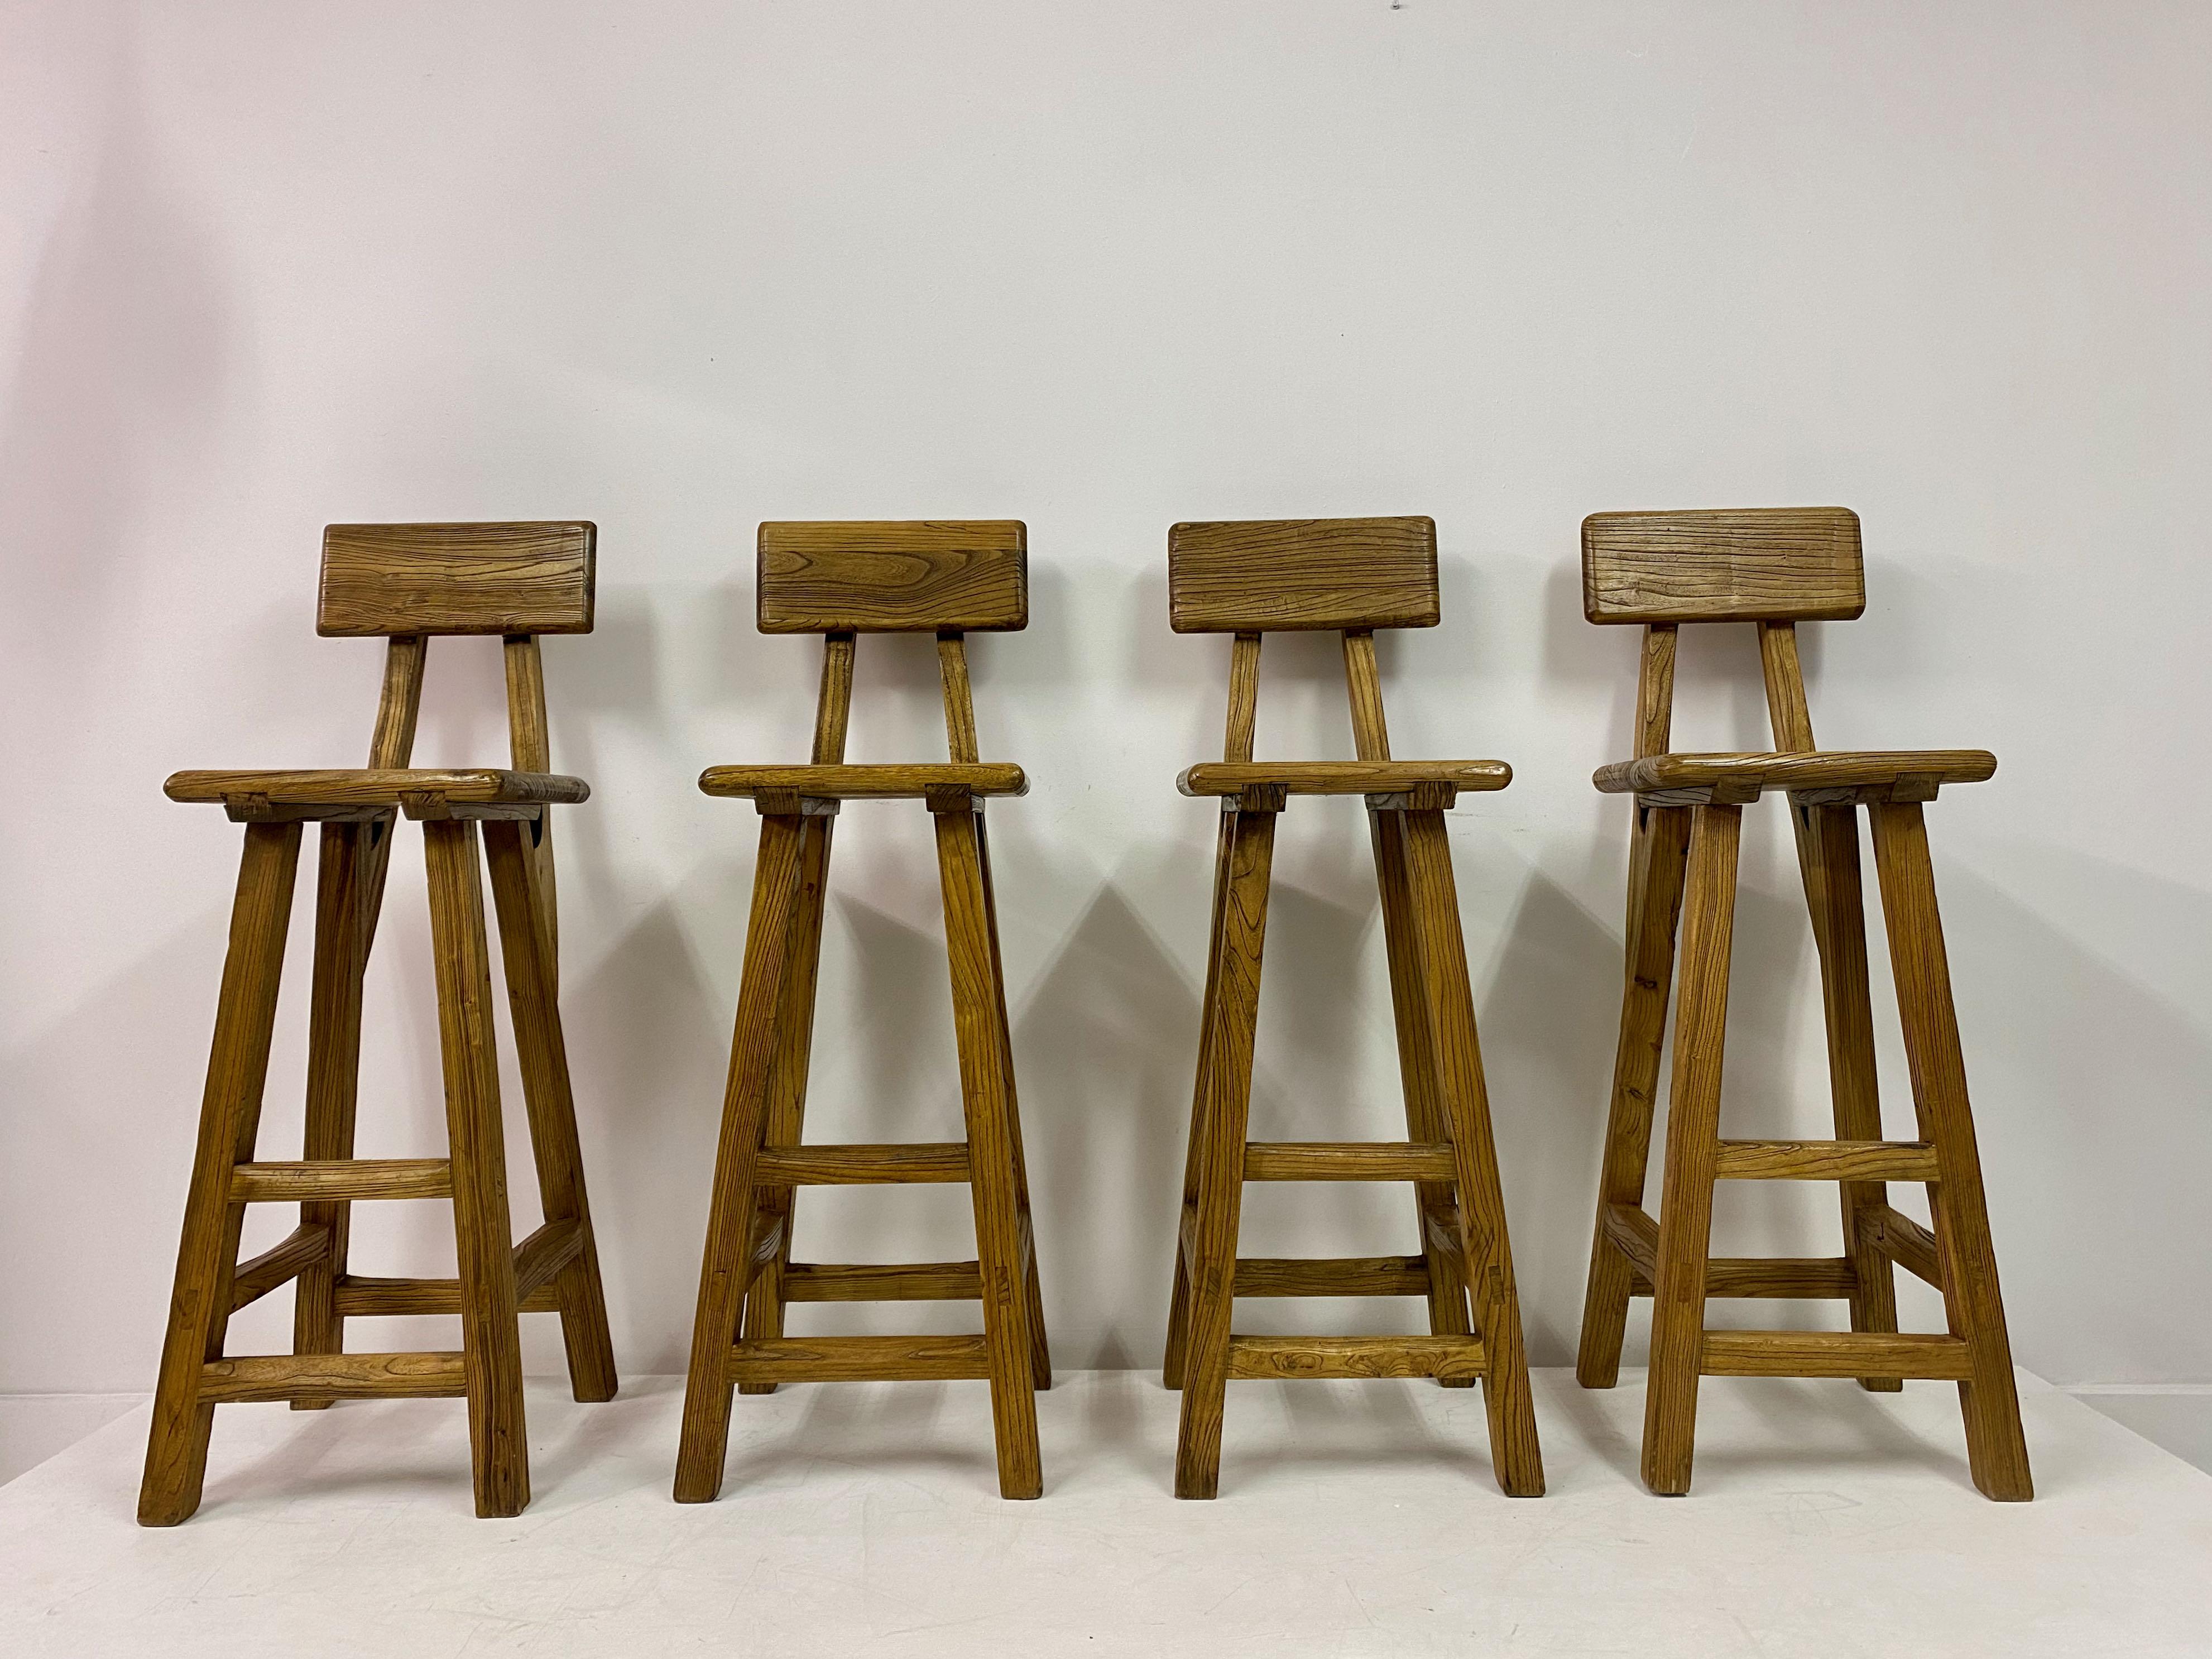 Set of four high stools

Made from solid elm

Mid to late 20th Century

French

Seat height 80cm.